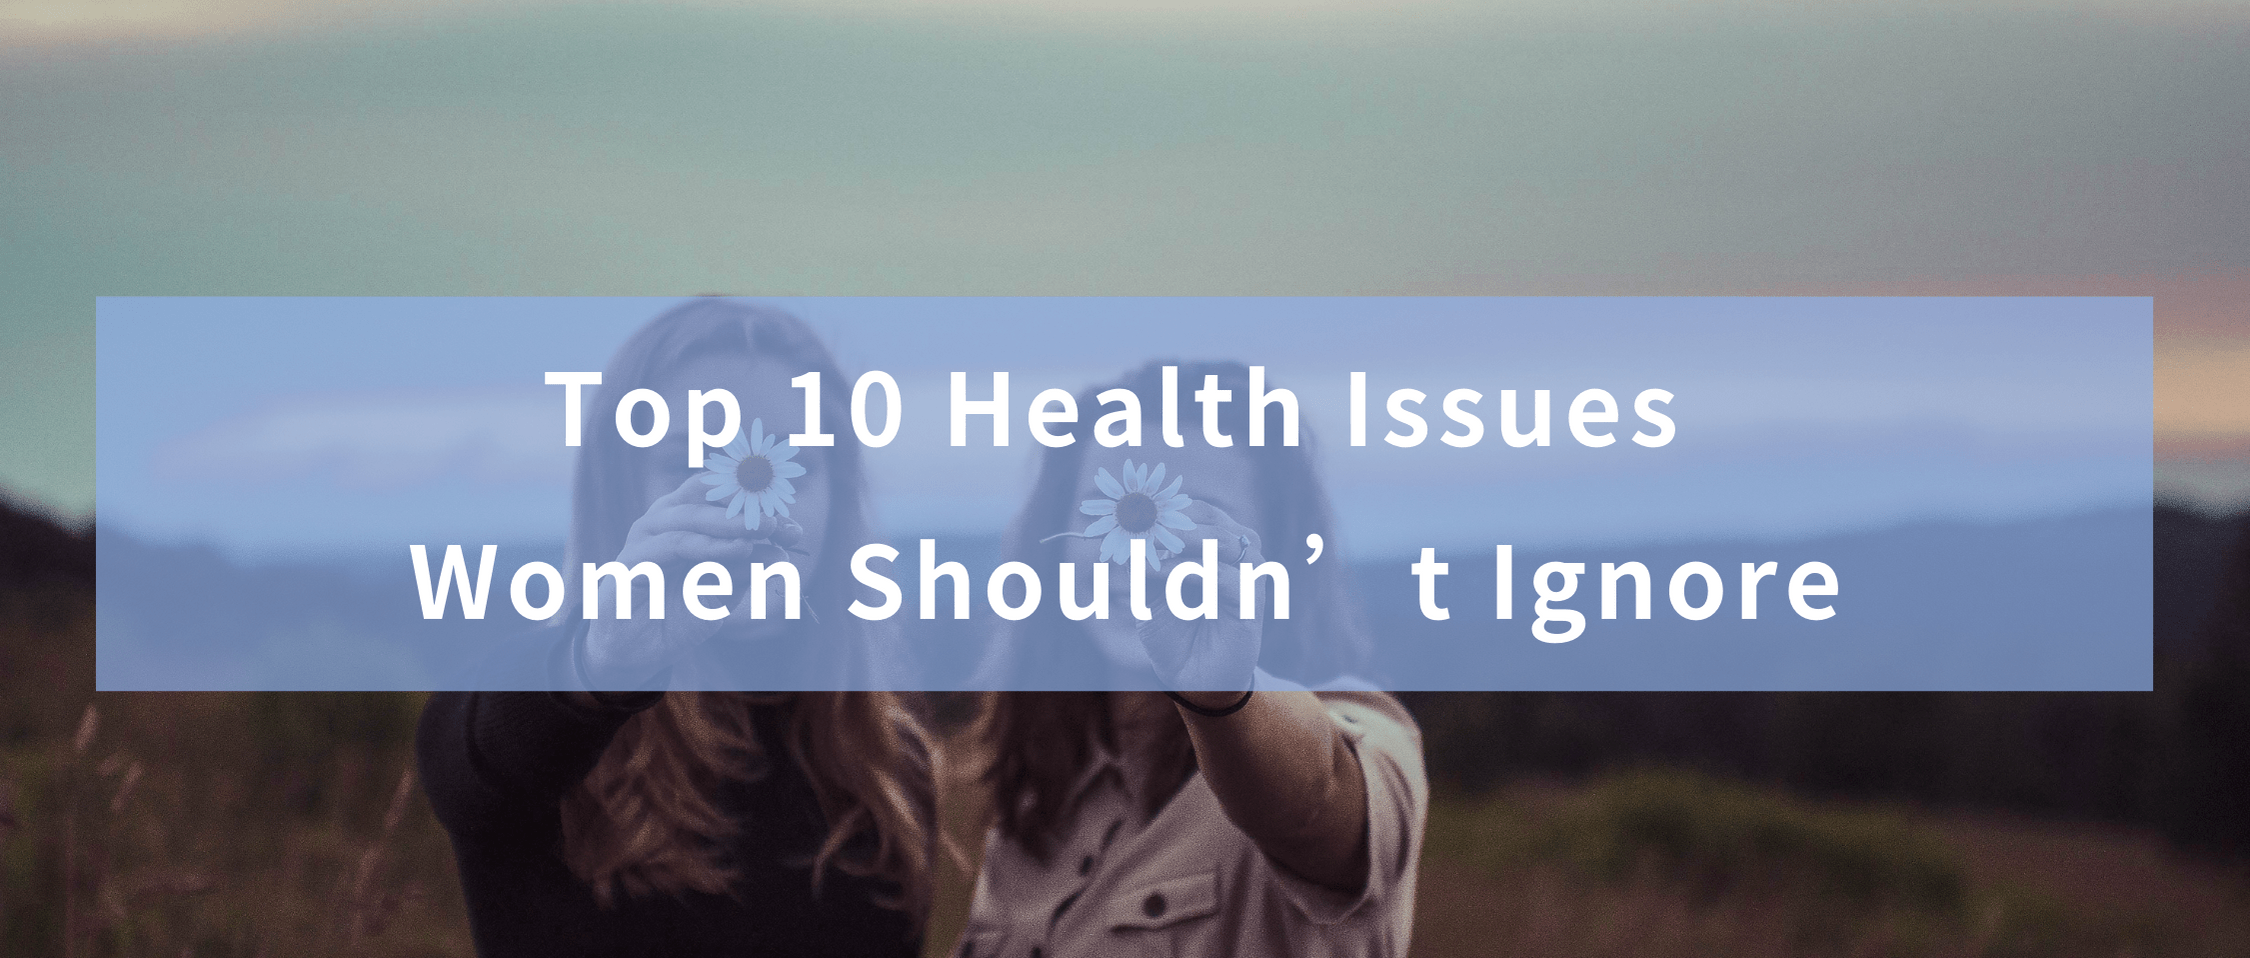 Top 10 Health Issues Women Shouldn’t Ignore - Blog Banner